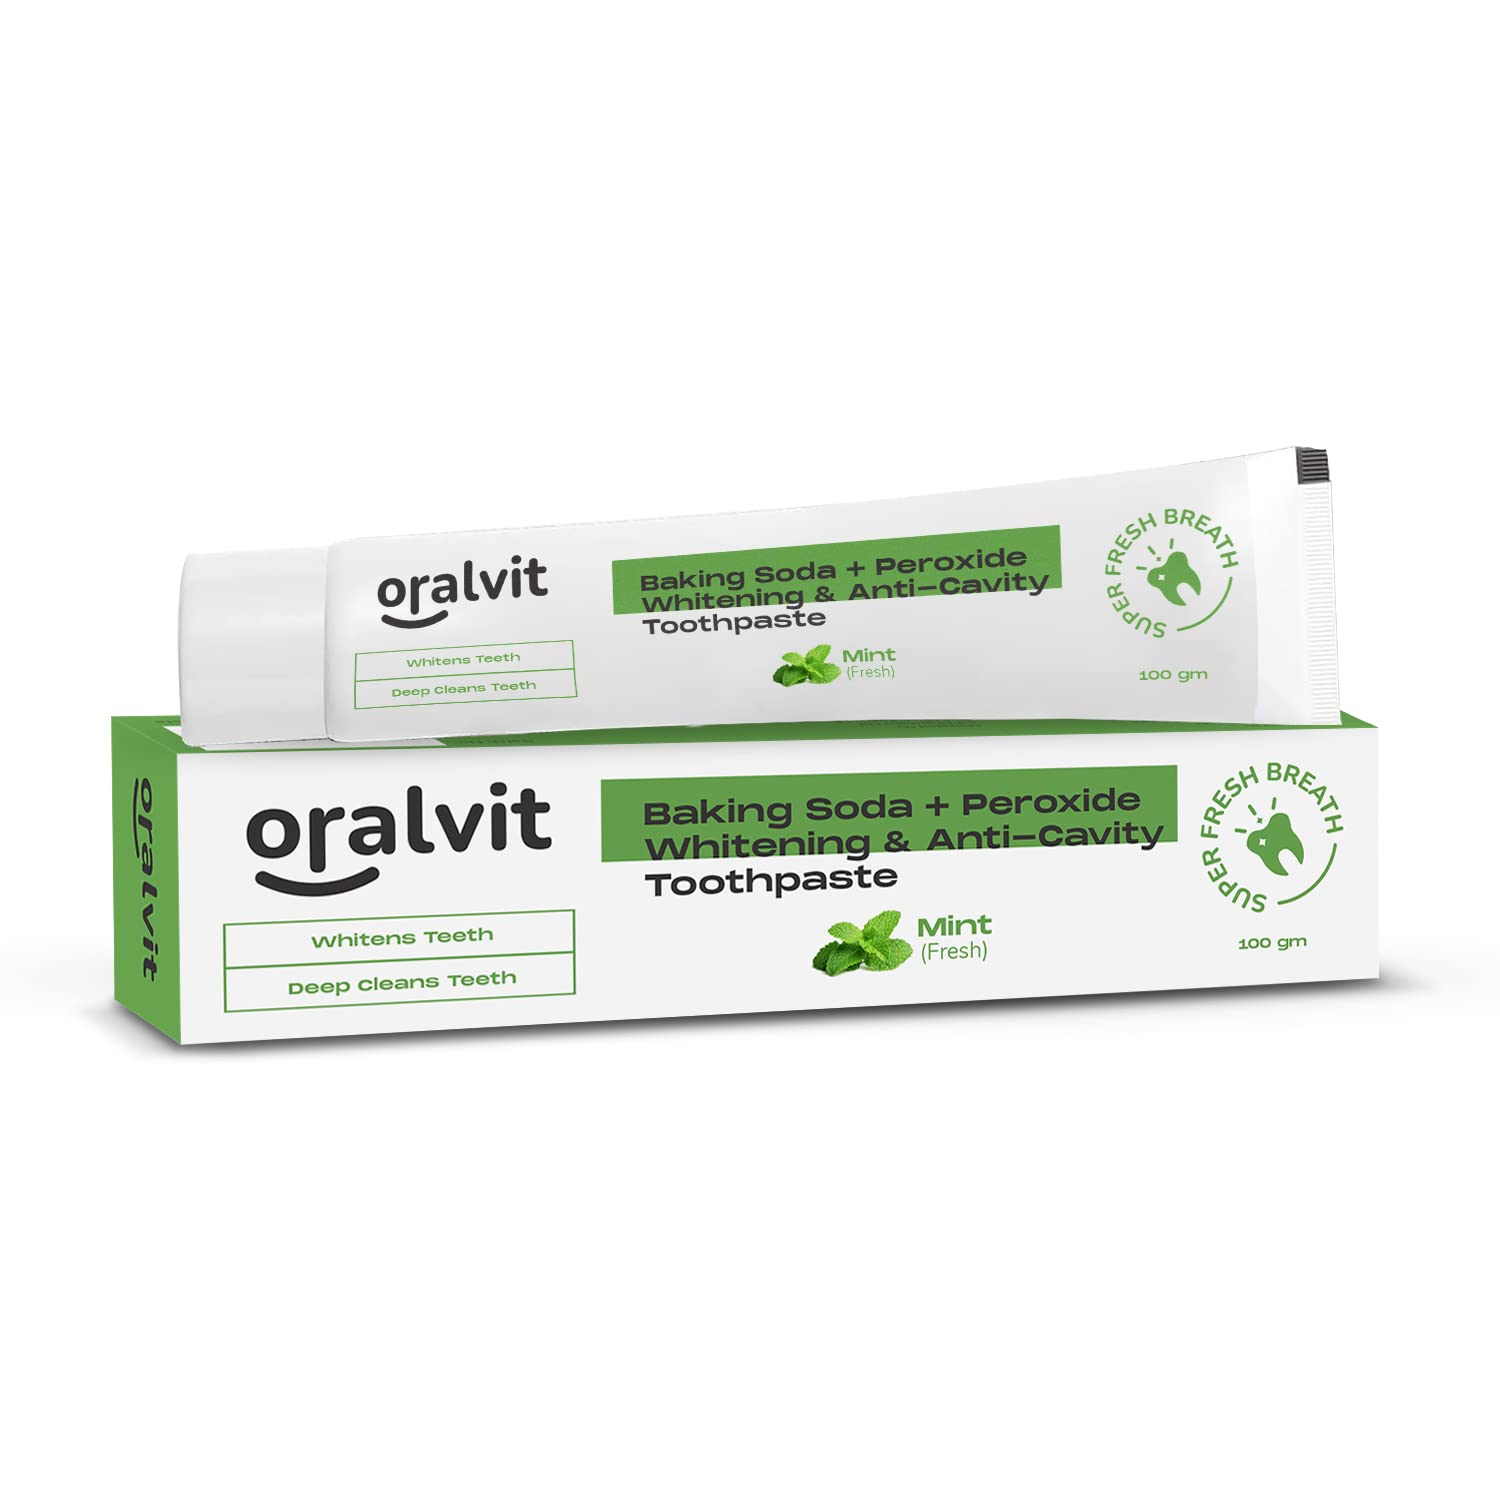 Oralvit Baking Soda and Peroxide Toothpaste for Whitening & Anti-Cavity | Toothpaste with Fresh Mint | Deep Cleanse |Super Fresh Breath | Extreme Whitening– 100gm Mint Flavour